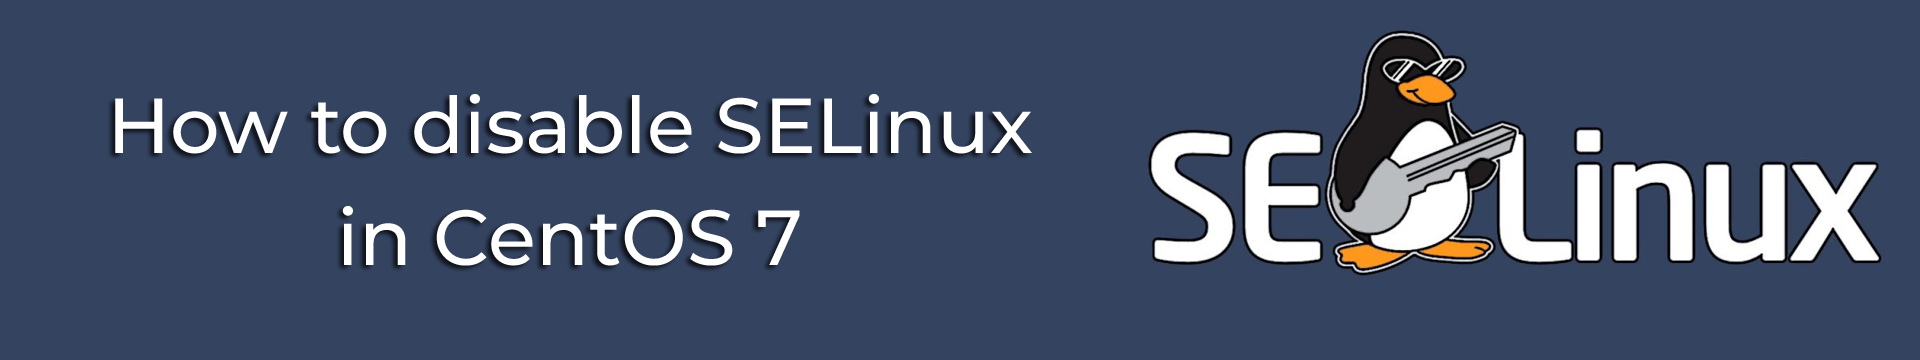 How to disable SELinux in CentOS 7